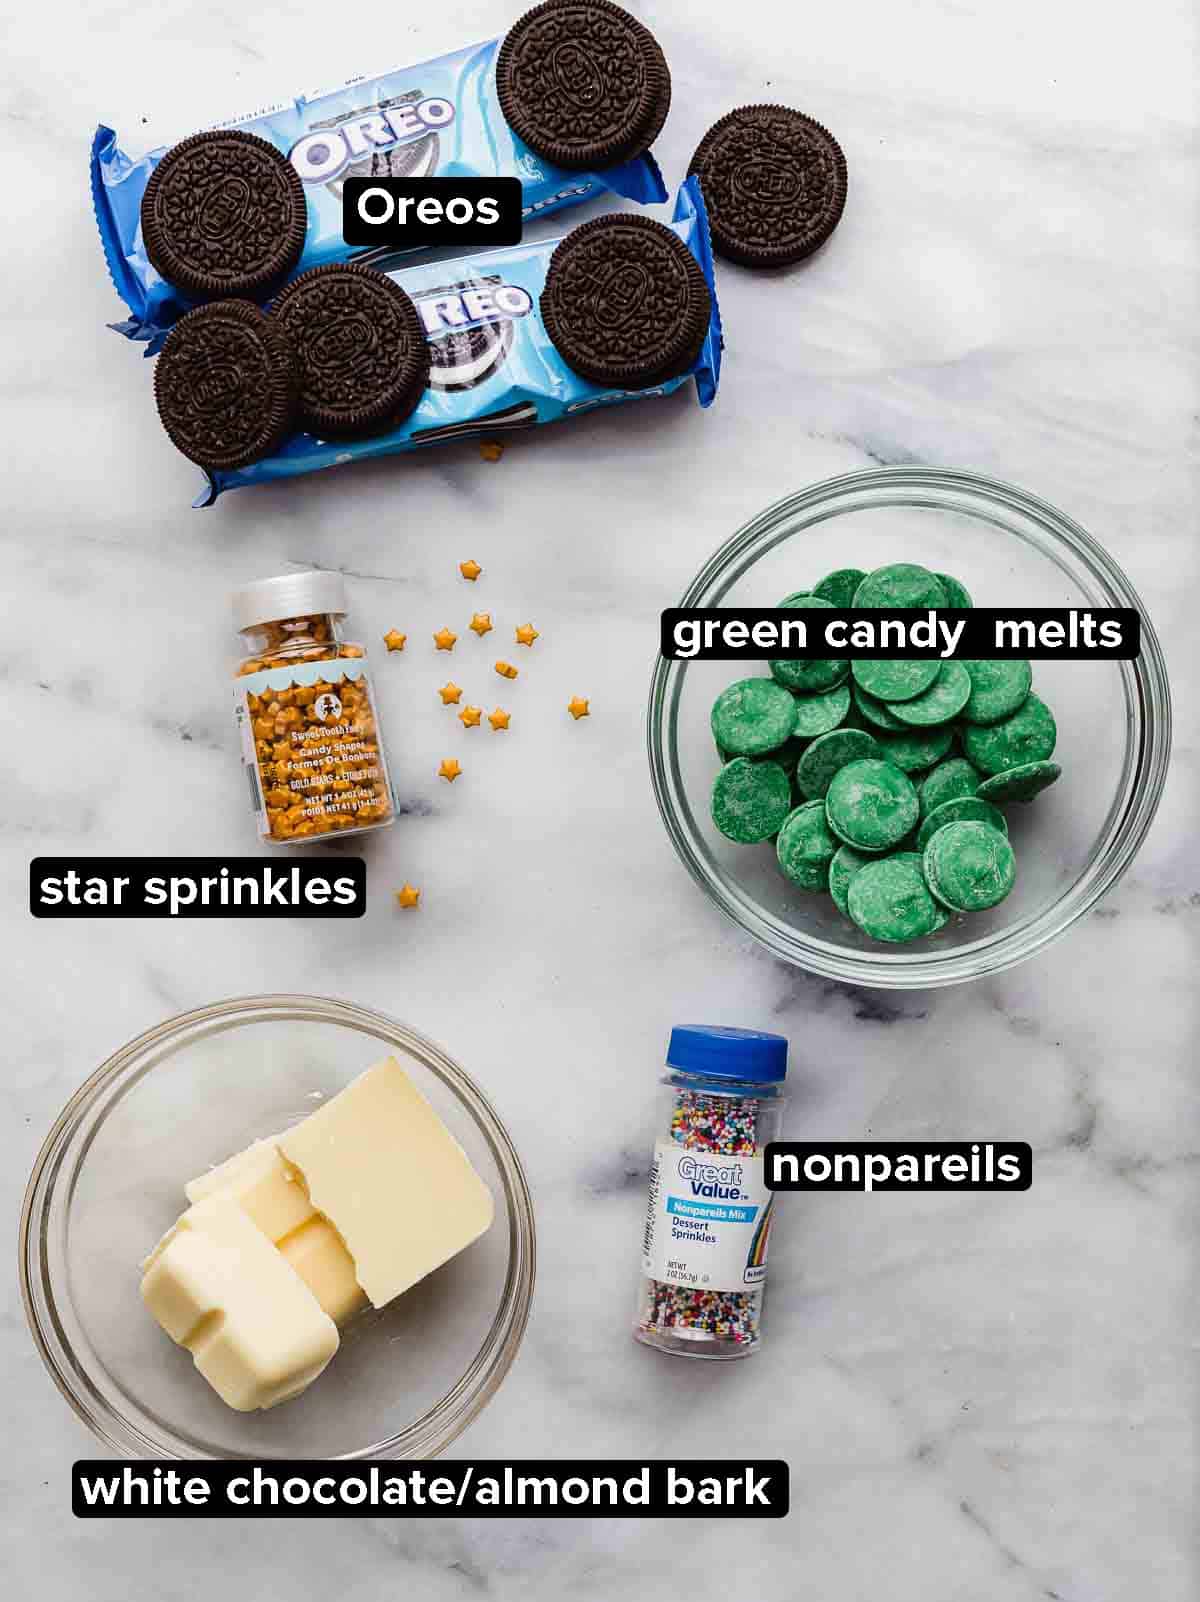 Christmas Tree Oreos ingredients on a white marble background: Oreos, green candy melts, white chocolate, nonpareil sprinkles, and star sprinkles.